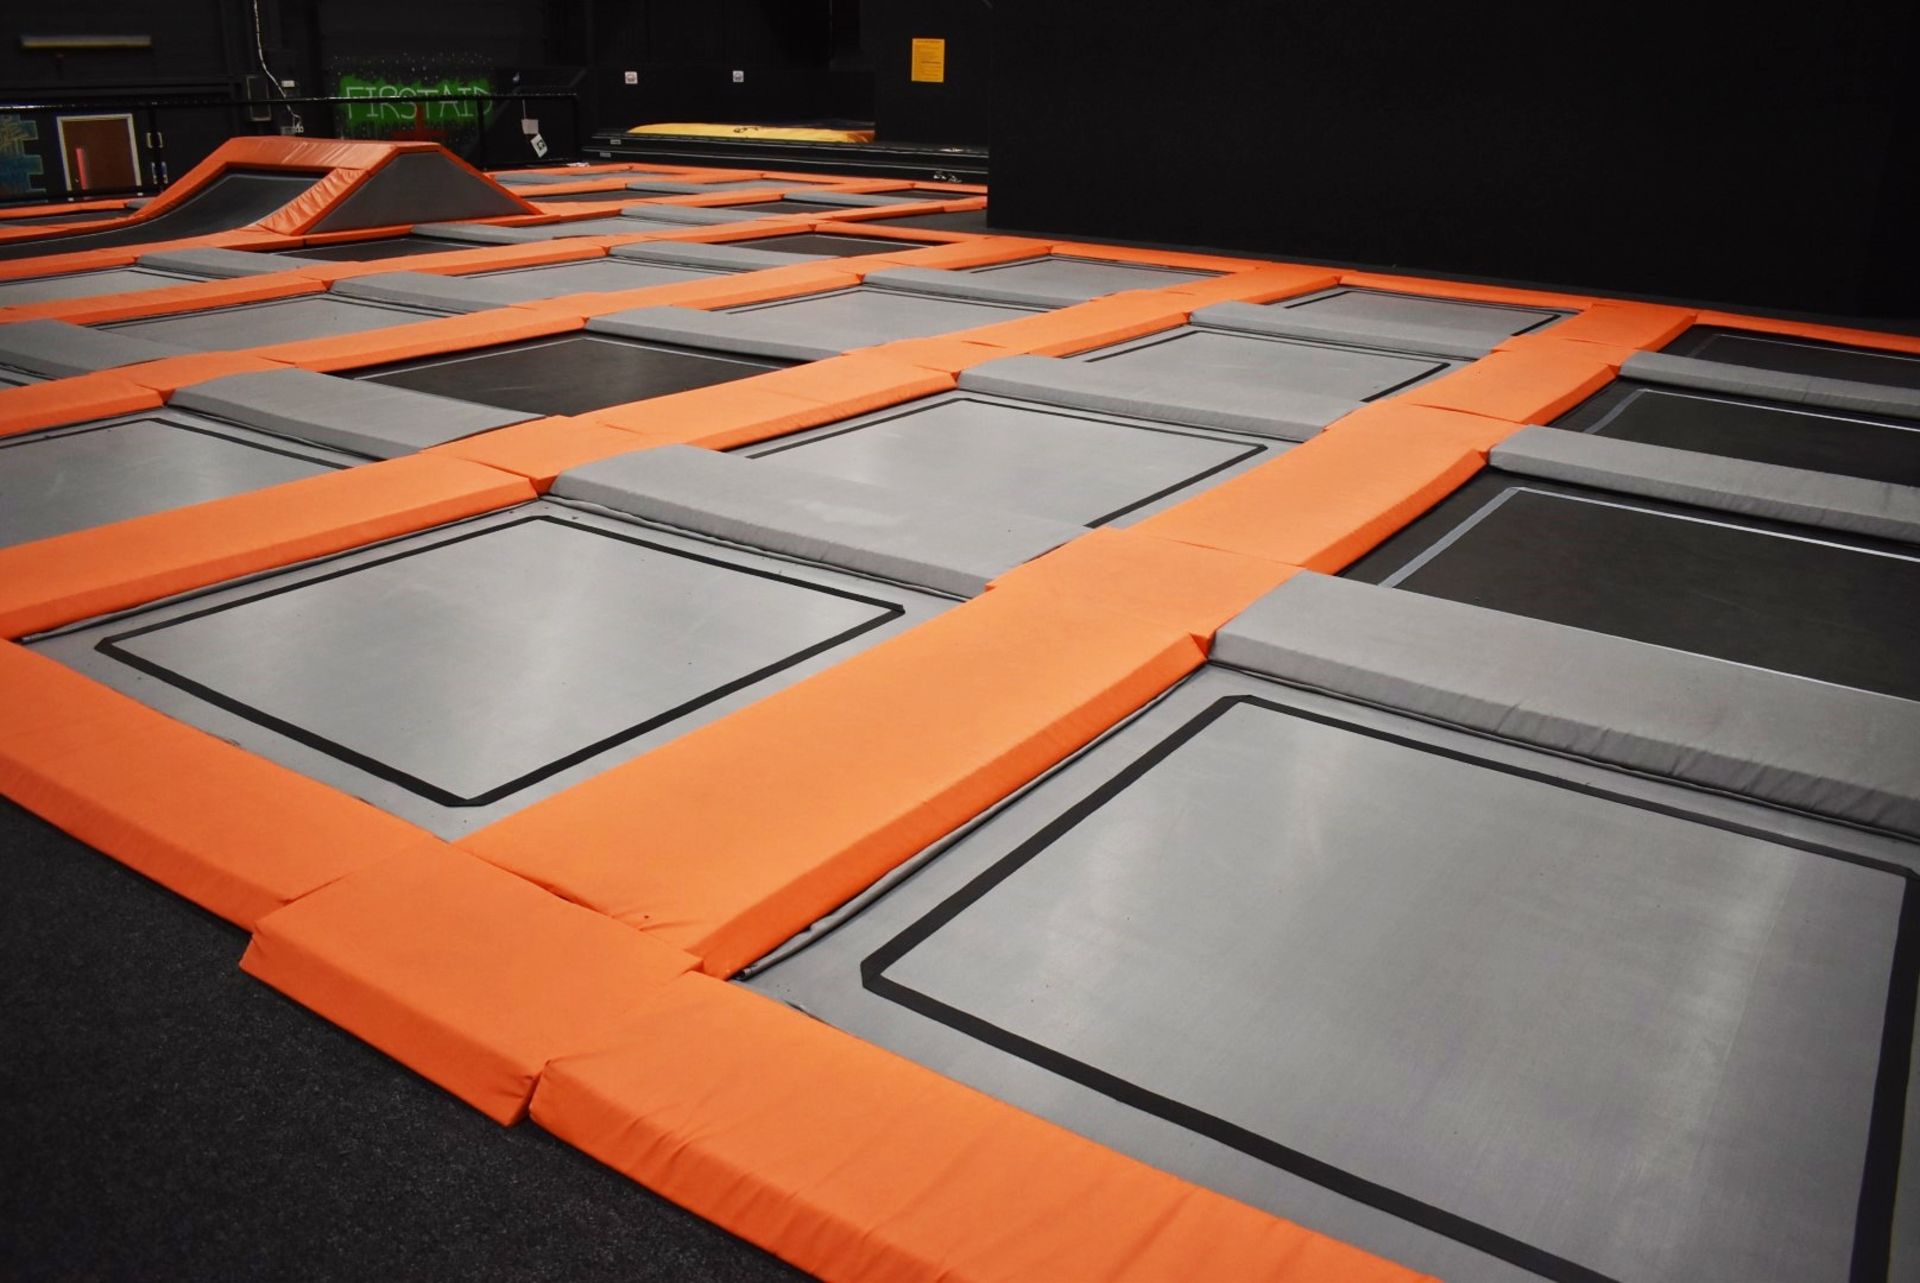 1 x Large Trampoline Park - Disassembled - Includes Dodgeball Arena And Jump Tower - CL766  - - Image 6 of 99